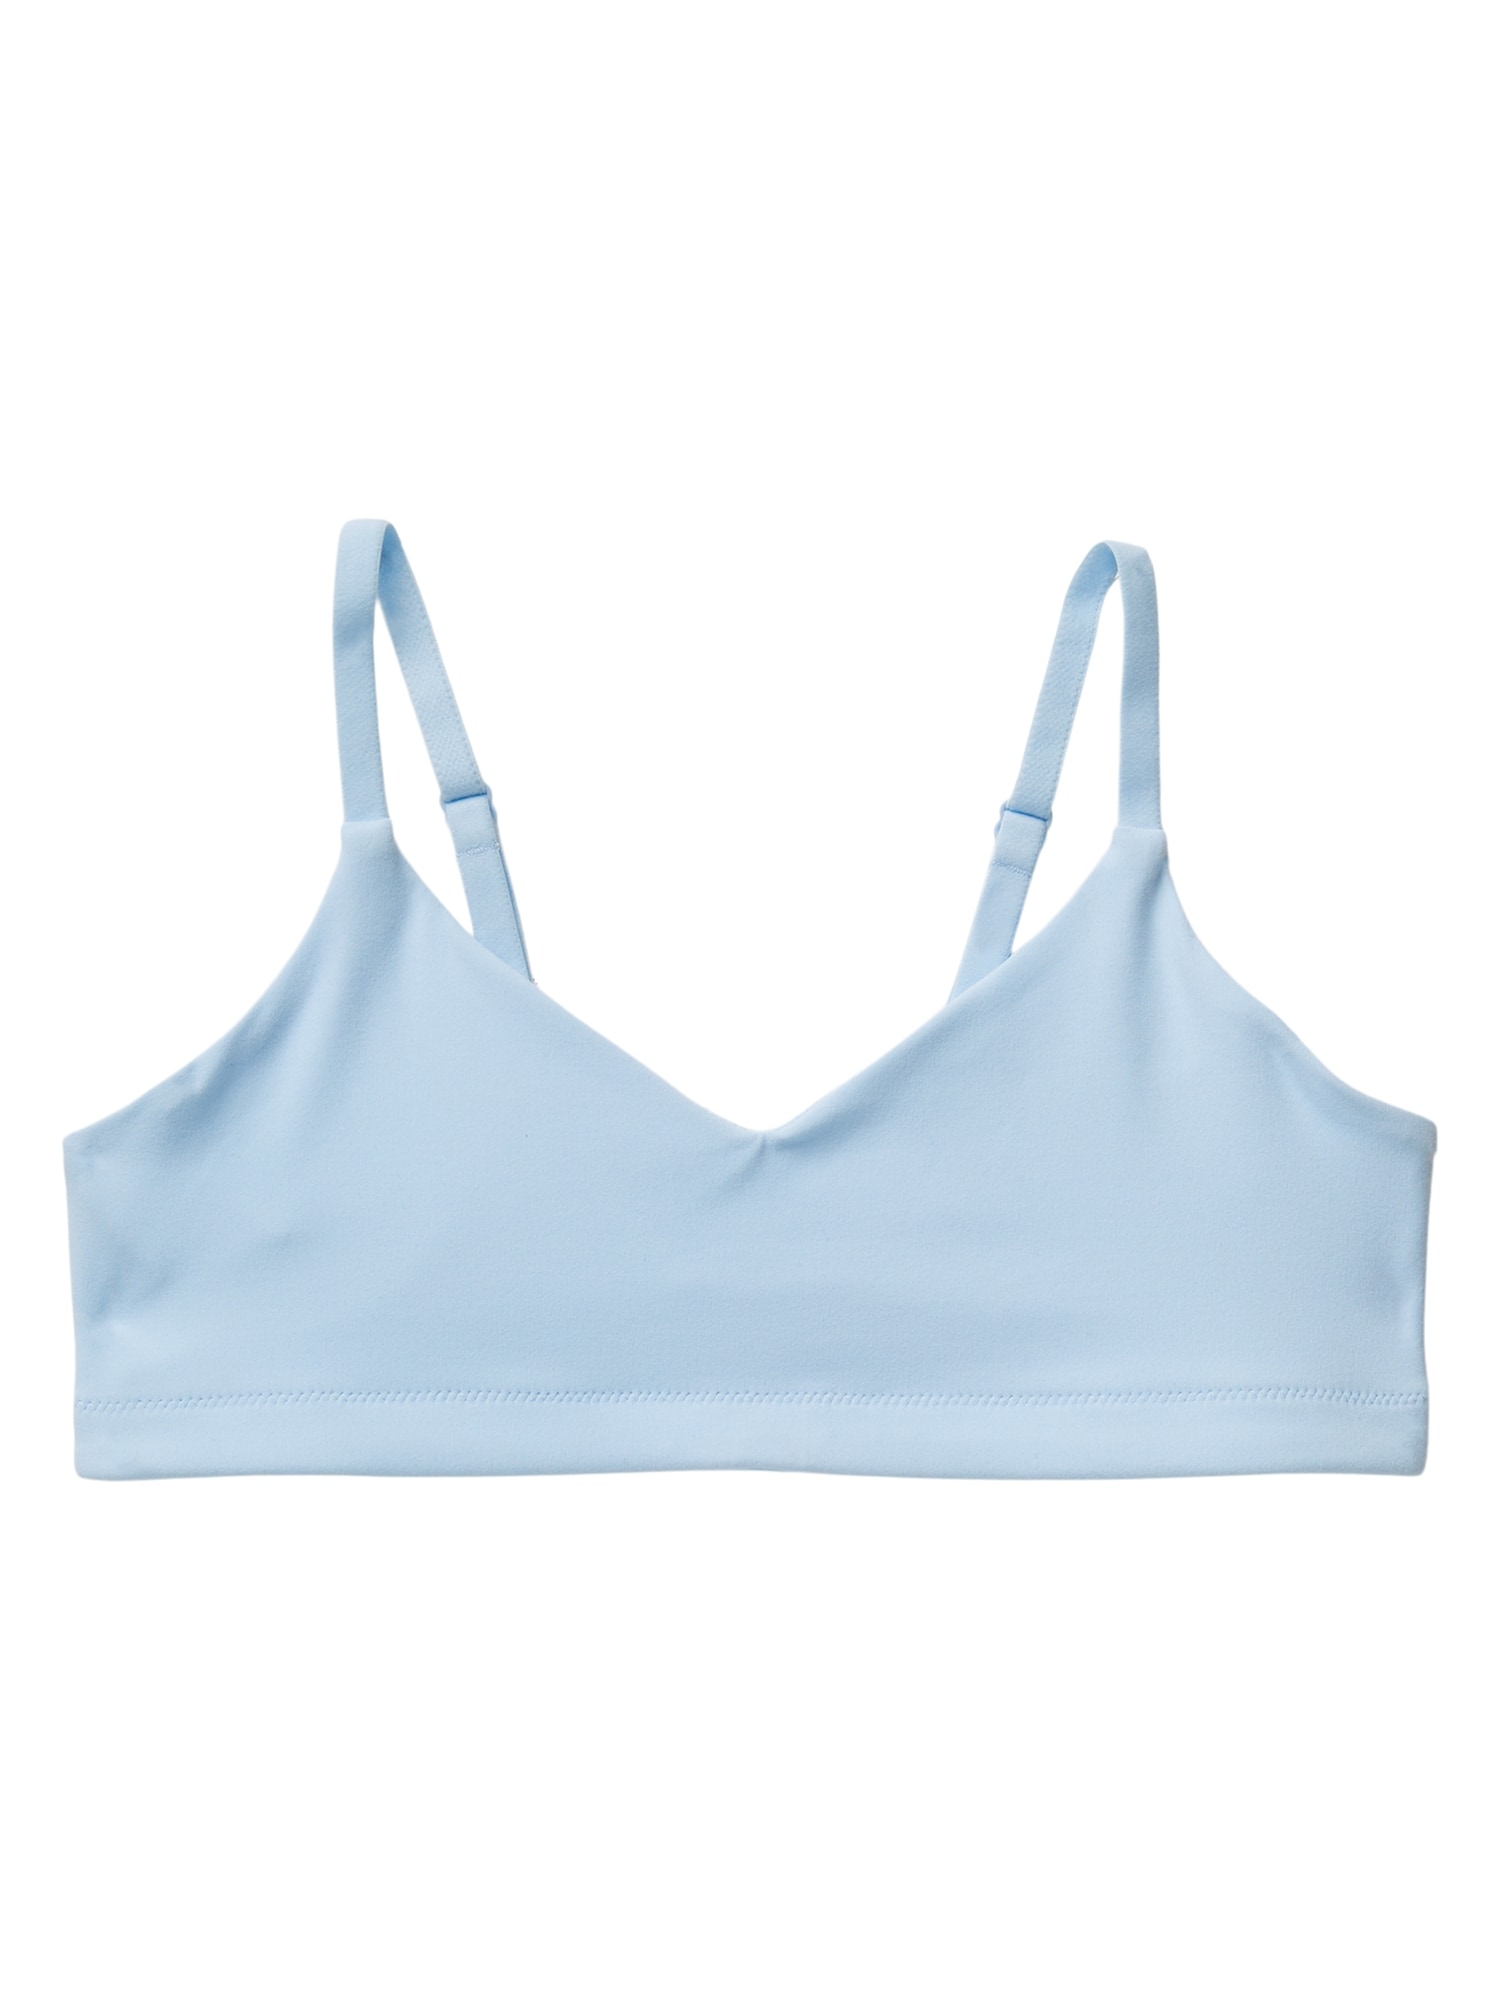 Classic Paded Bras for Women - Ladies Bras Casual Bras for Girls